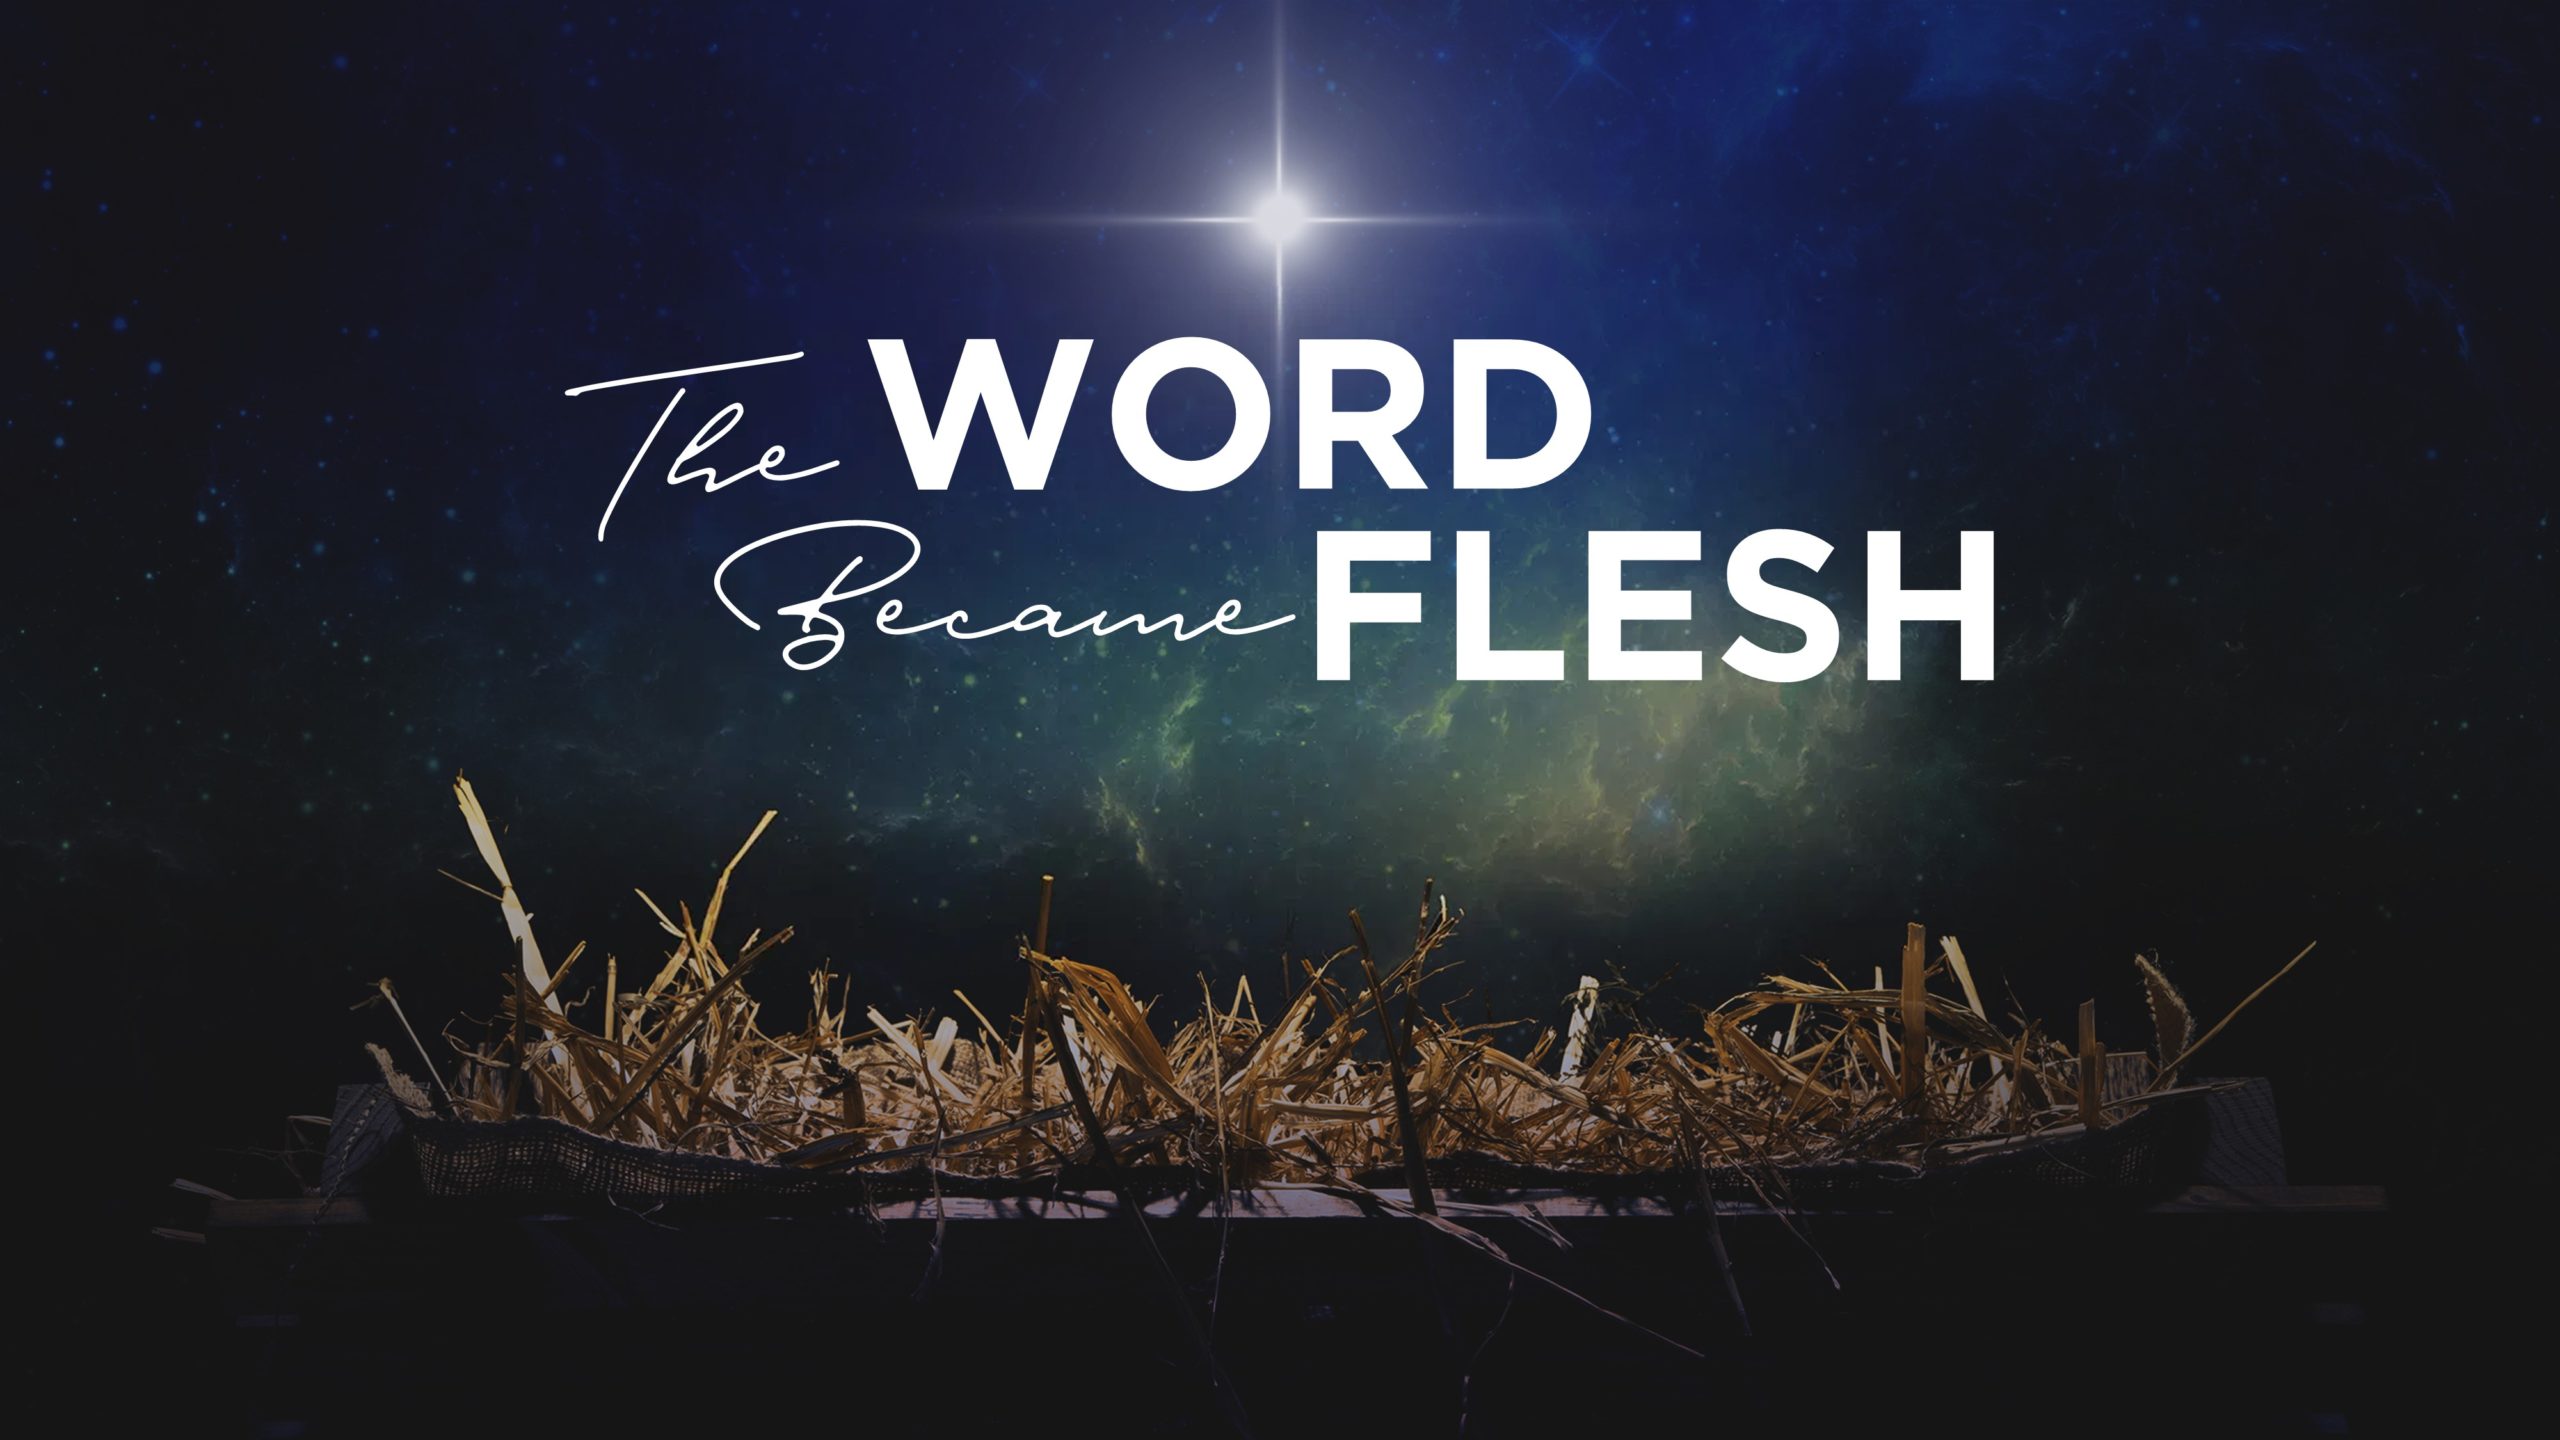 The_Word_Became_Flesh_2020_Advent_Series_Small_Title